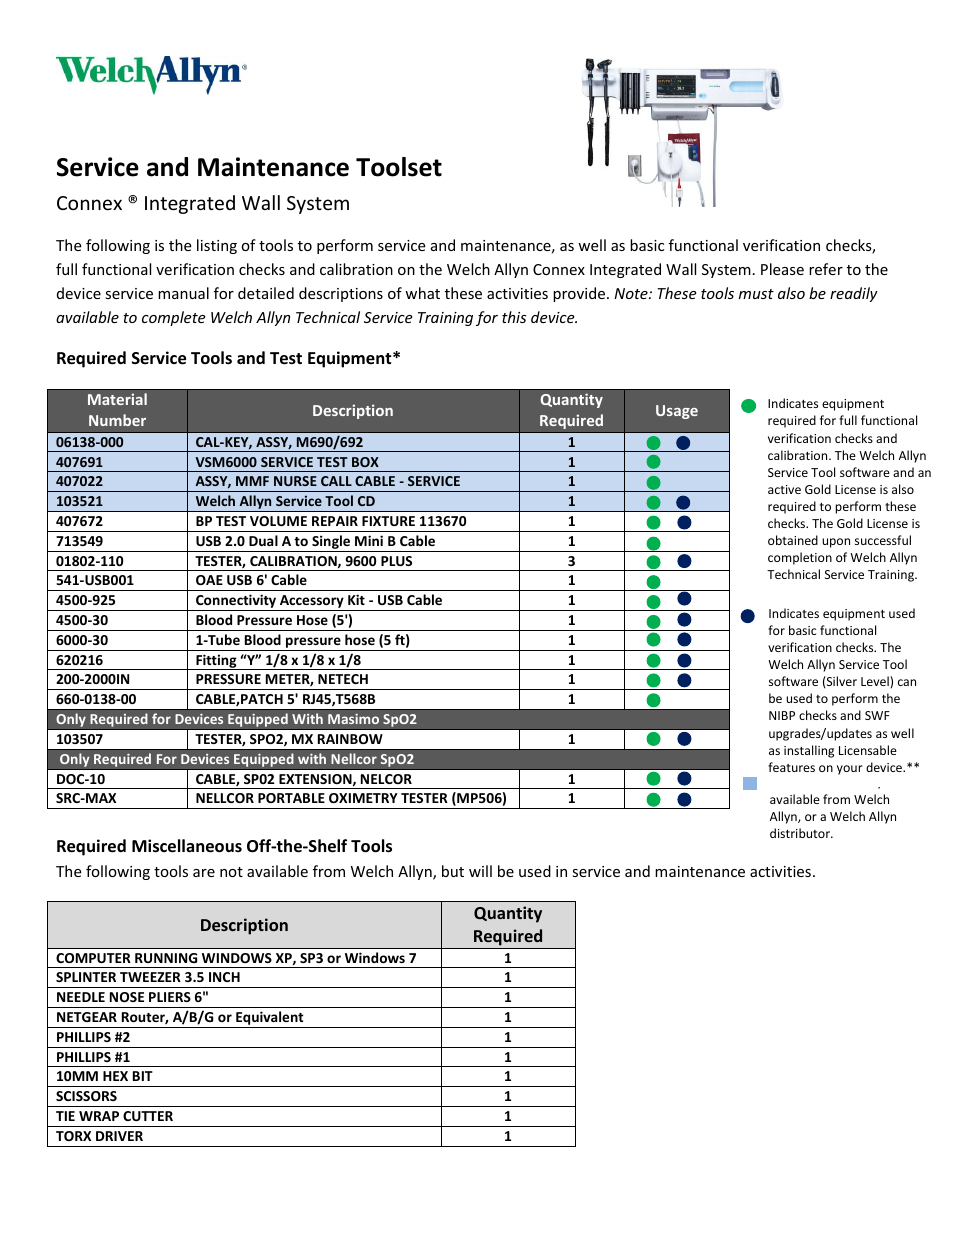 Connex Integrated Wall System, Required Service Tools and Test Equipment - Quick Reference Guide